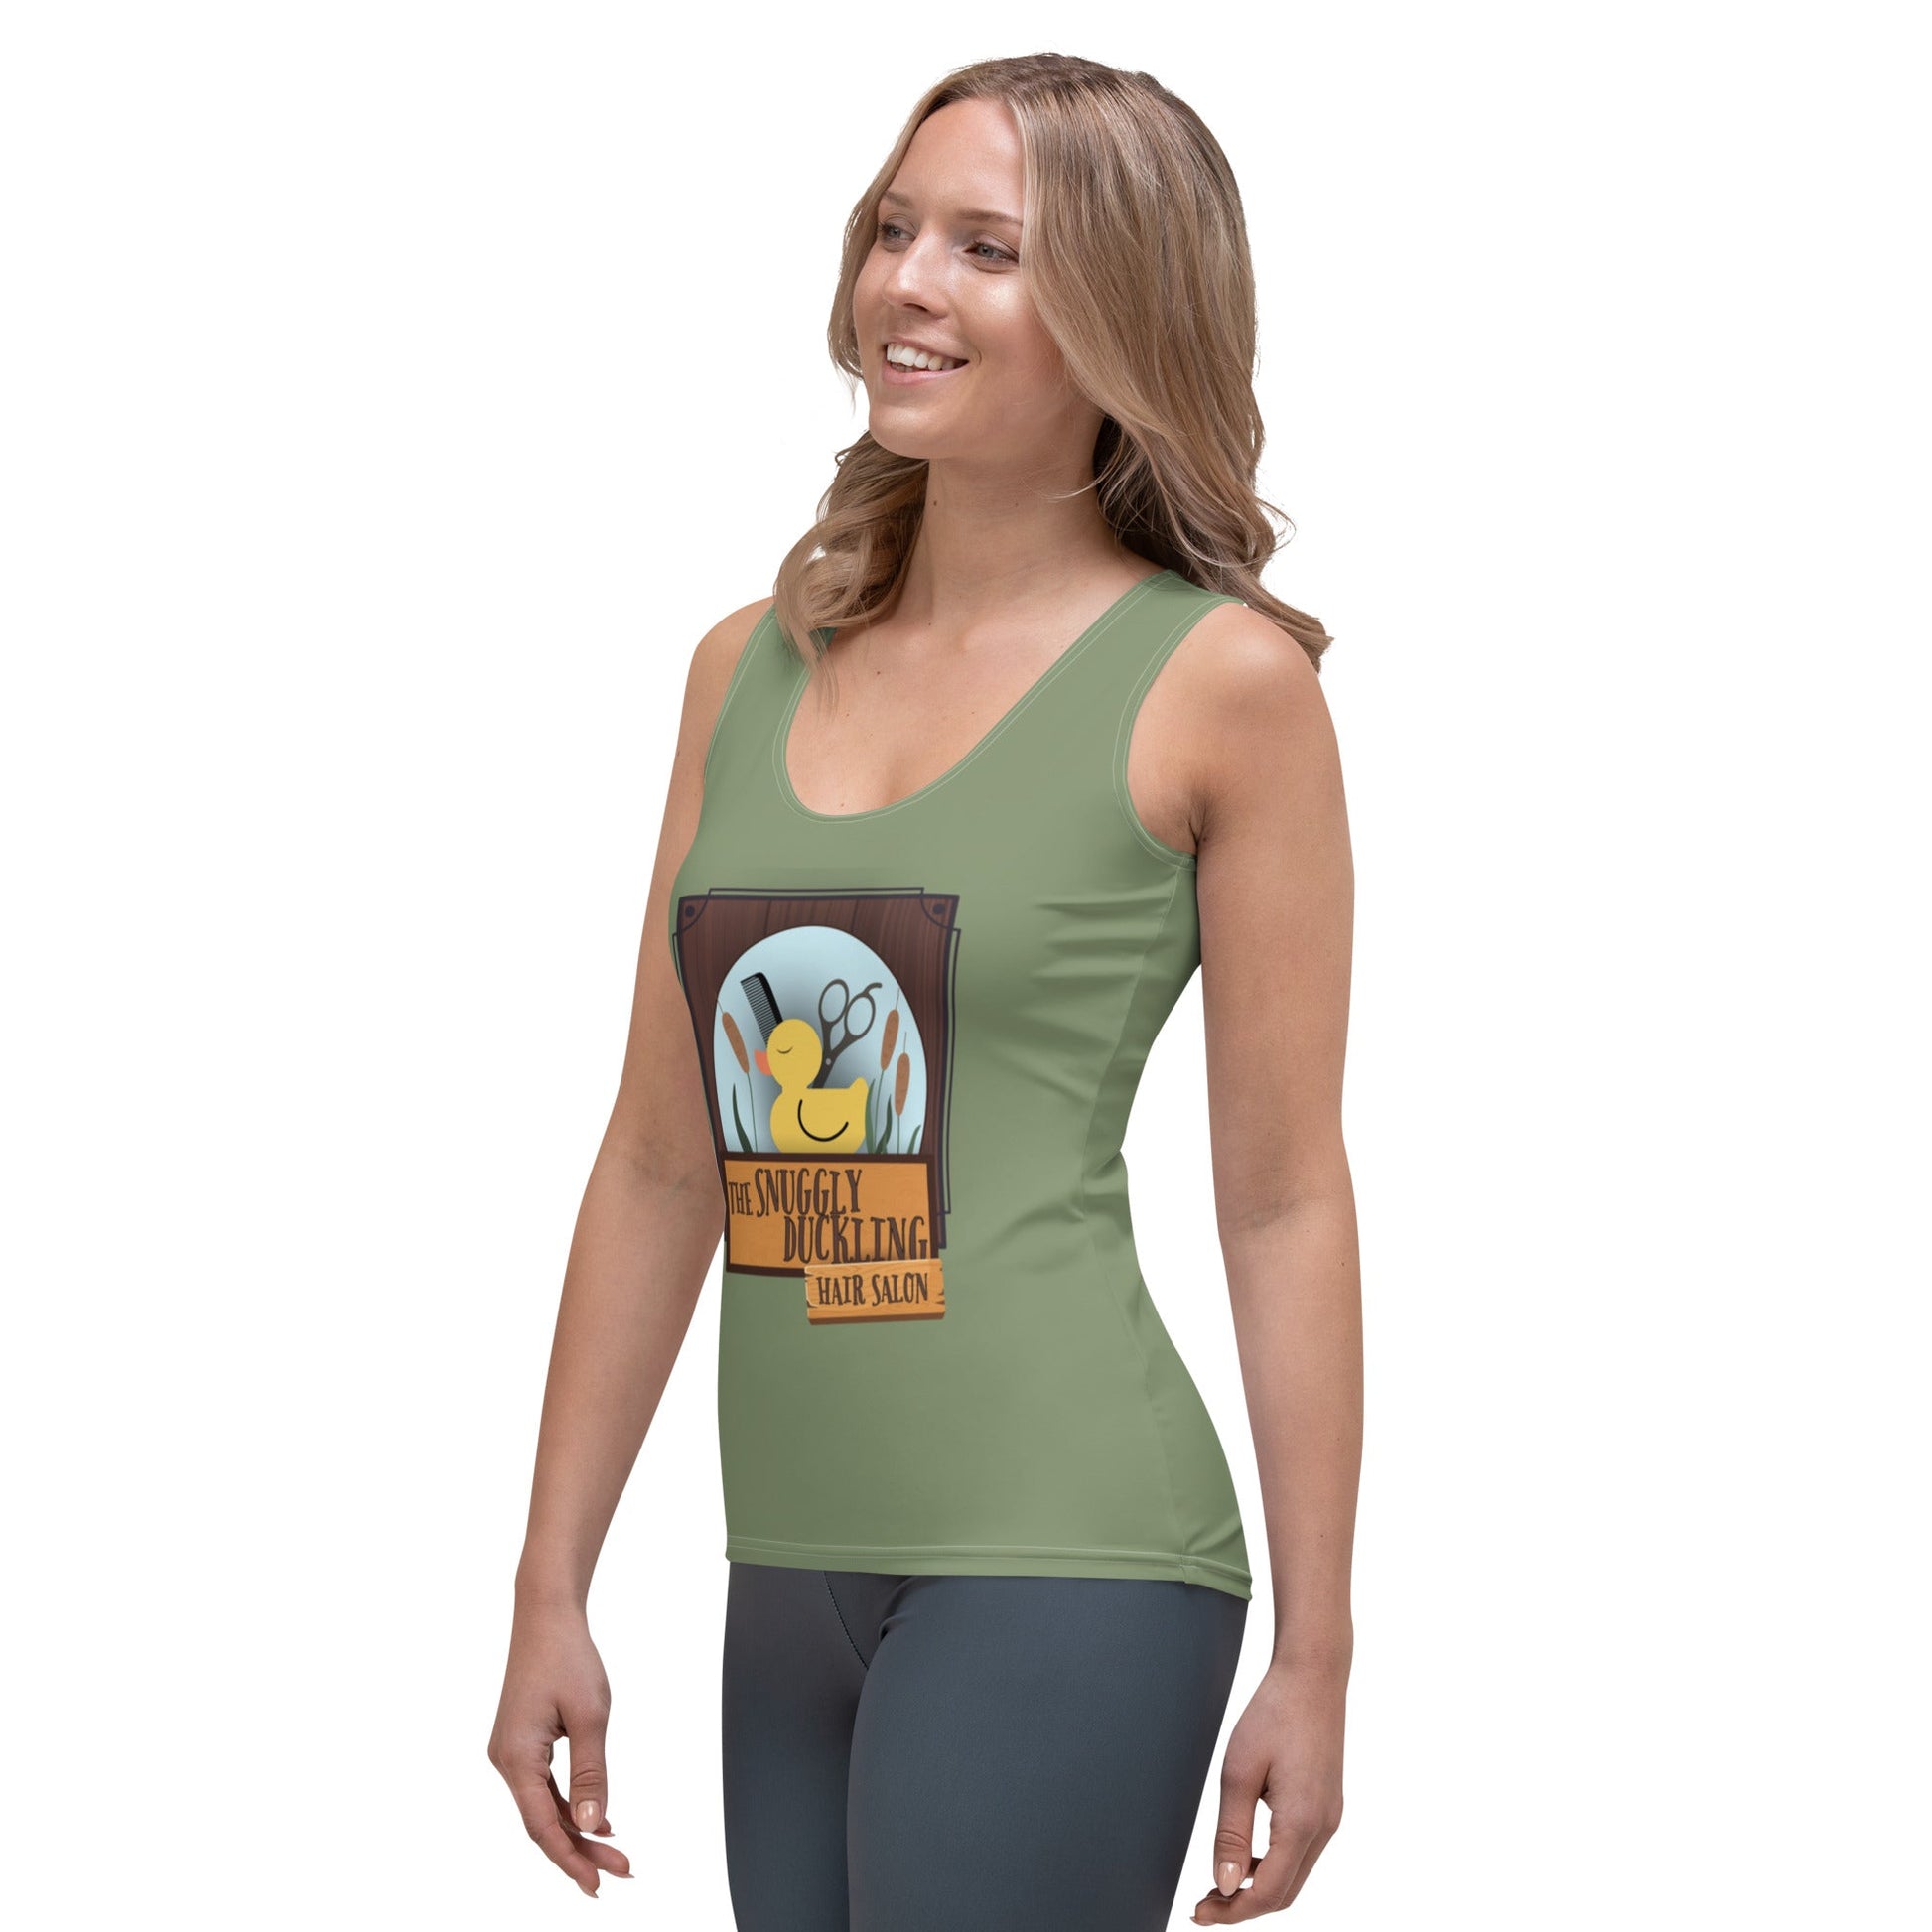 Snuggly Duckling Salon Tank Top adult tangledall day disneyAdult T-ShirtWrong Lever Clothing